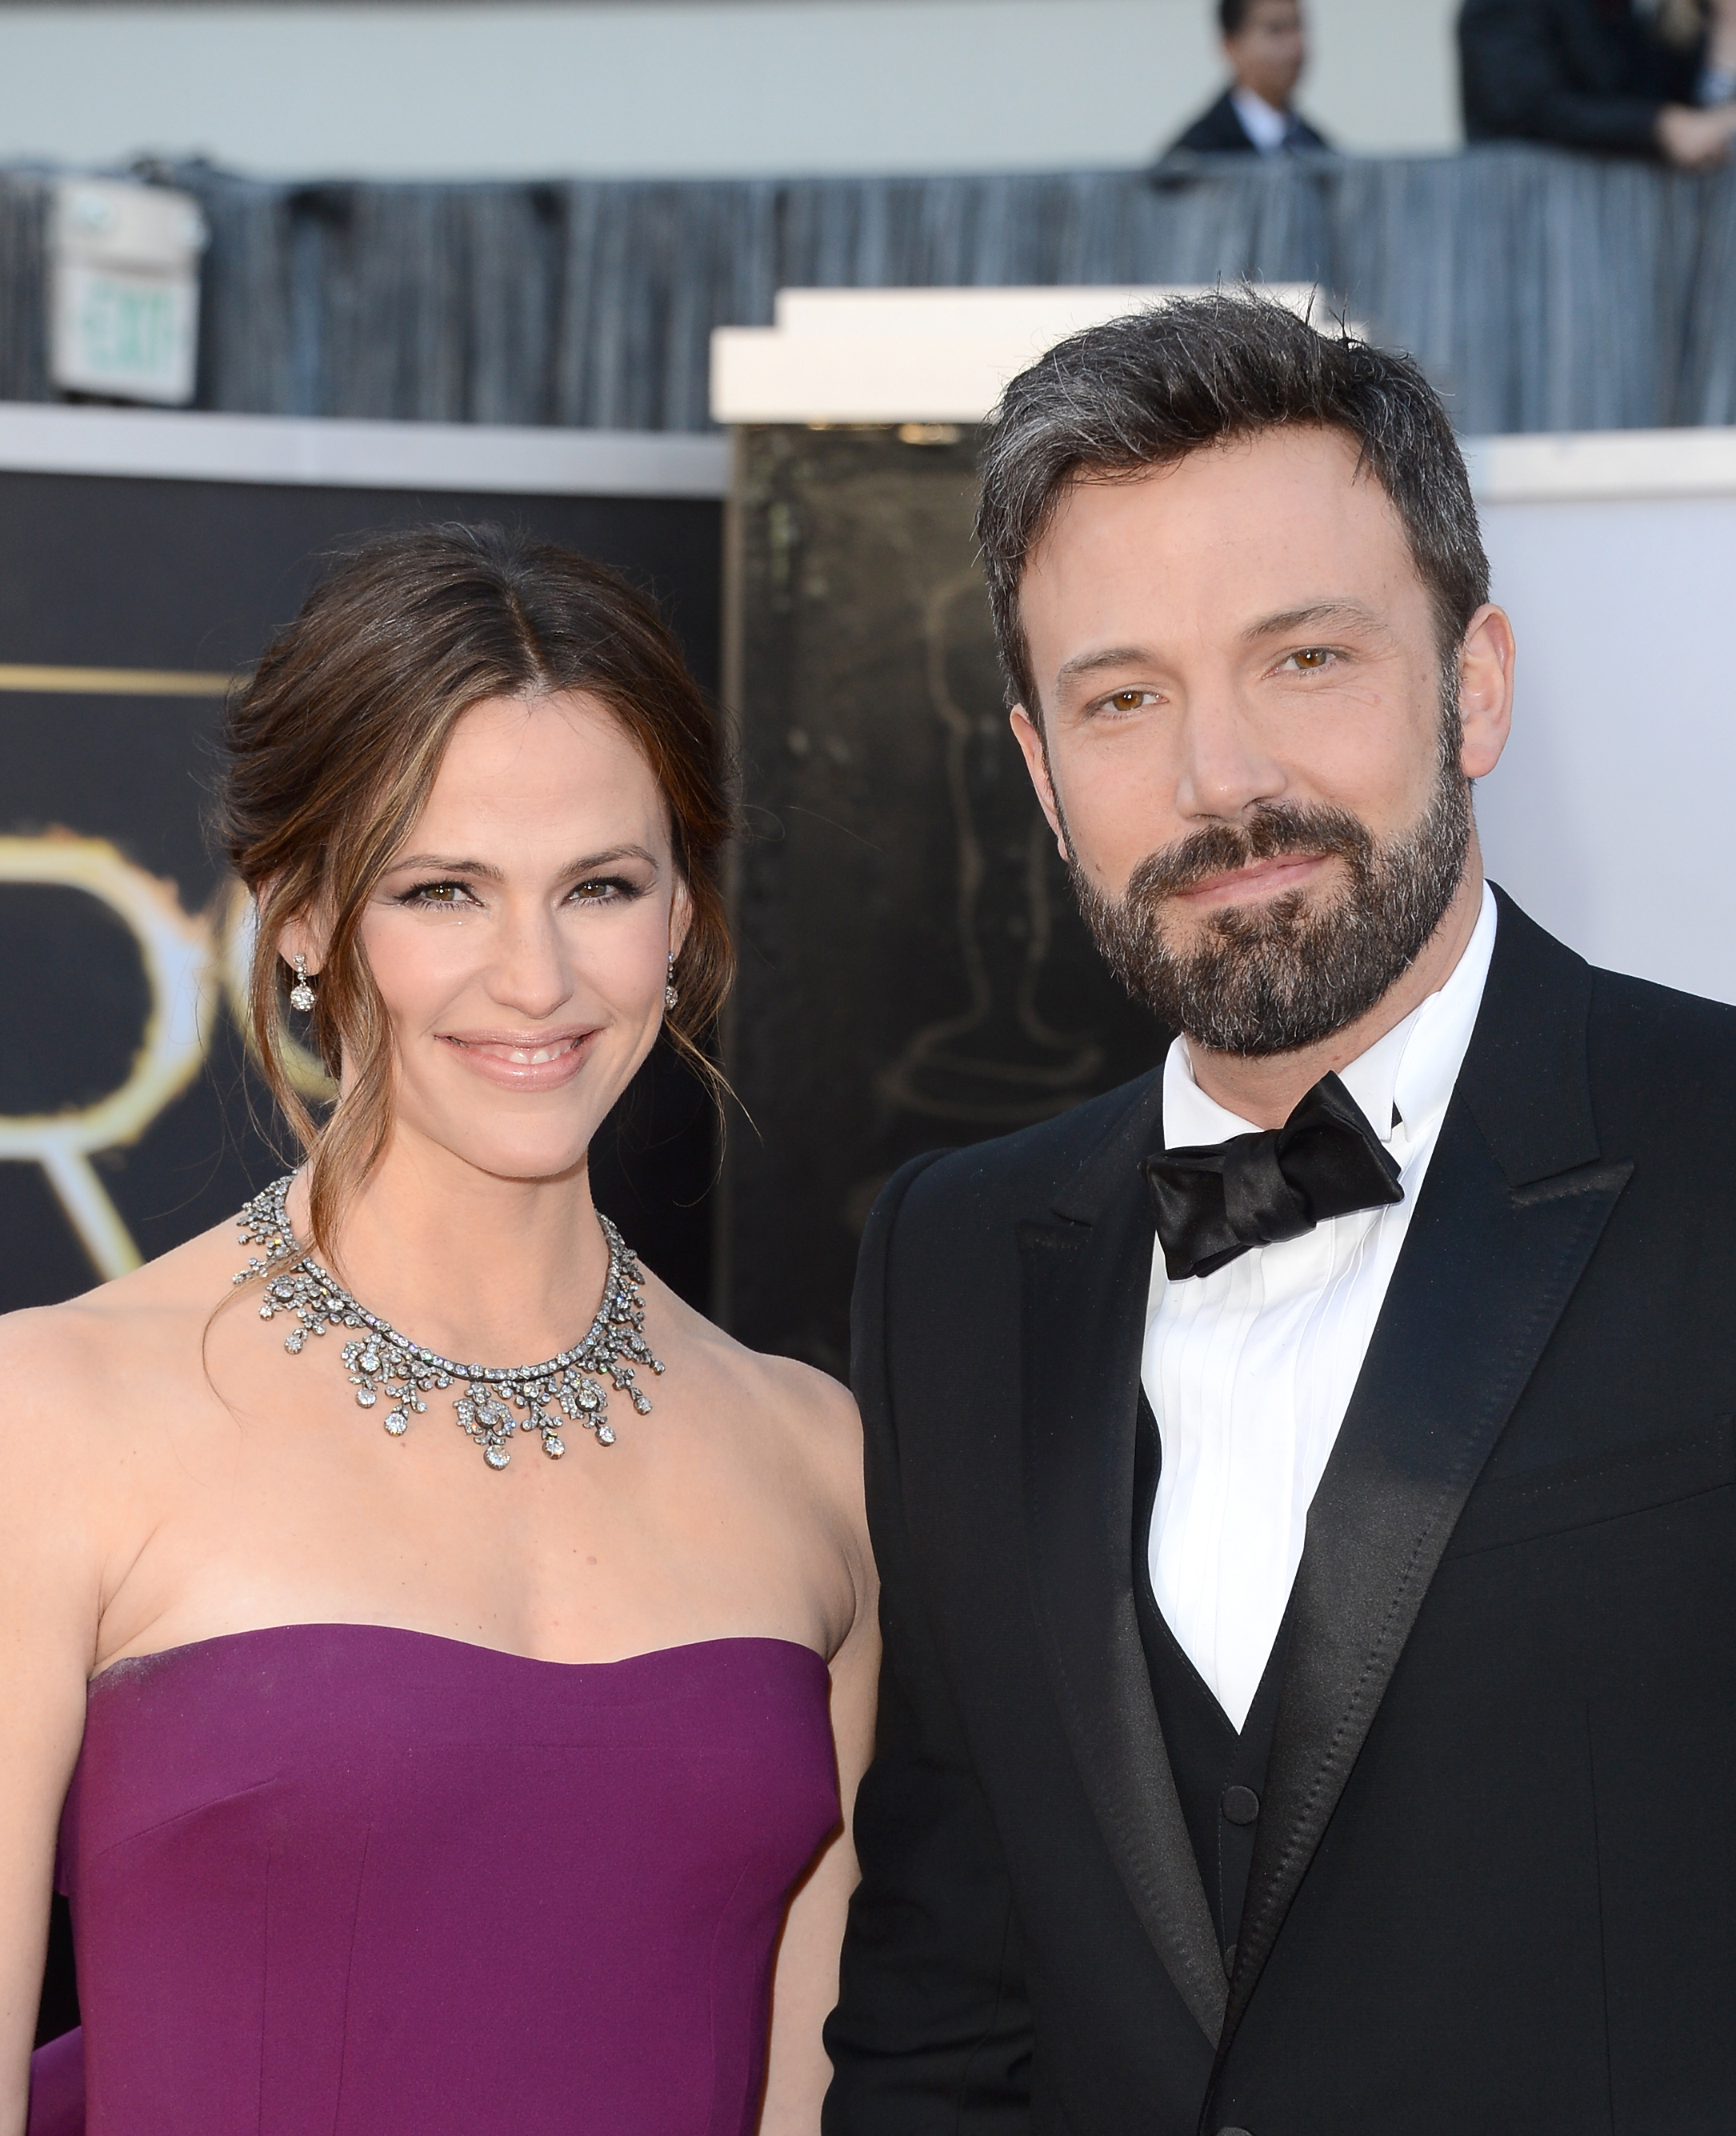 Jennifer Garner and Ben Affleck arrive at the Oscars at Hollywood & Highland Center on February 24, 2013, in Hollywood, California. | Source: Getty Images